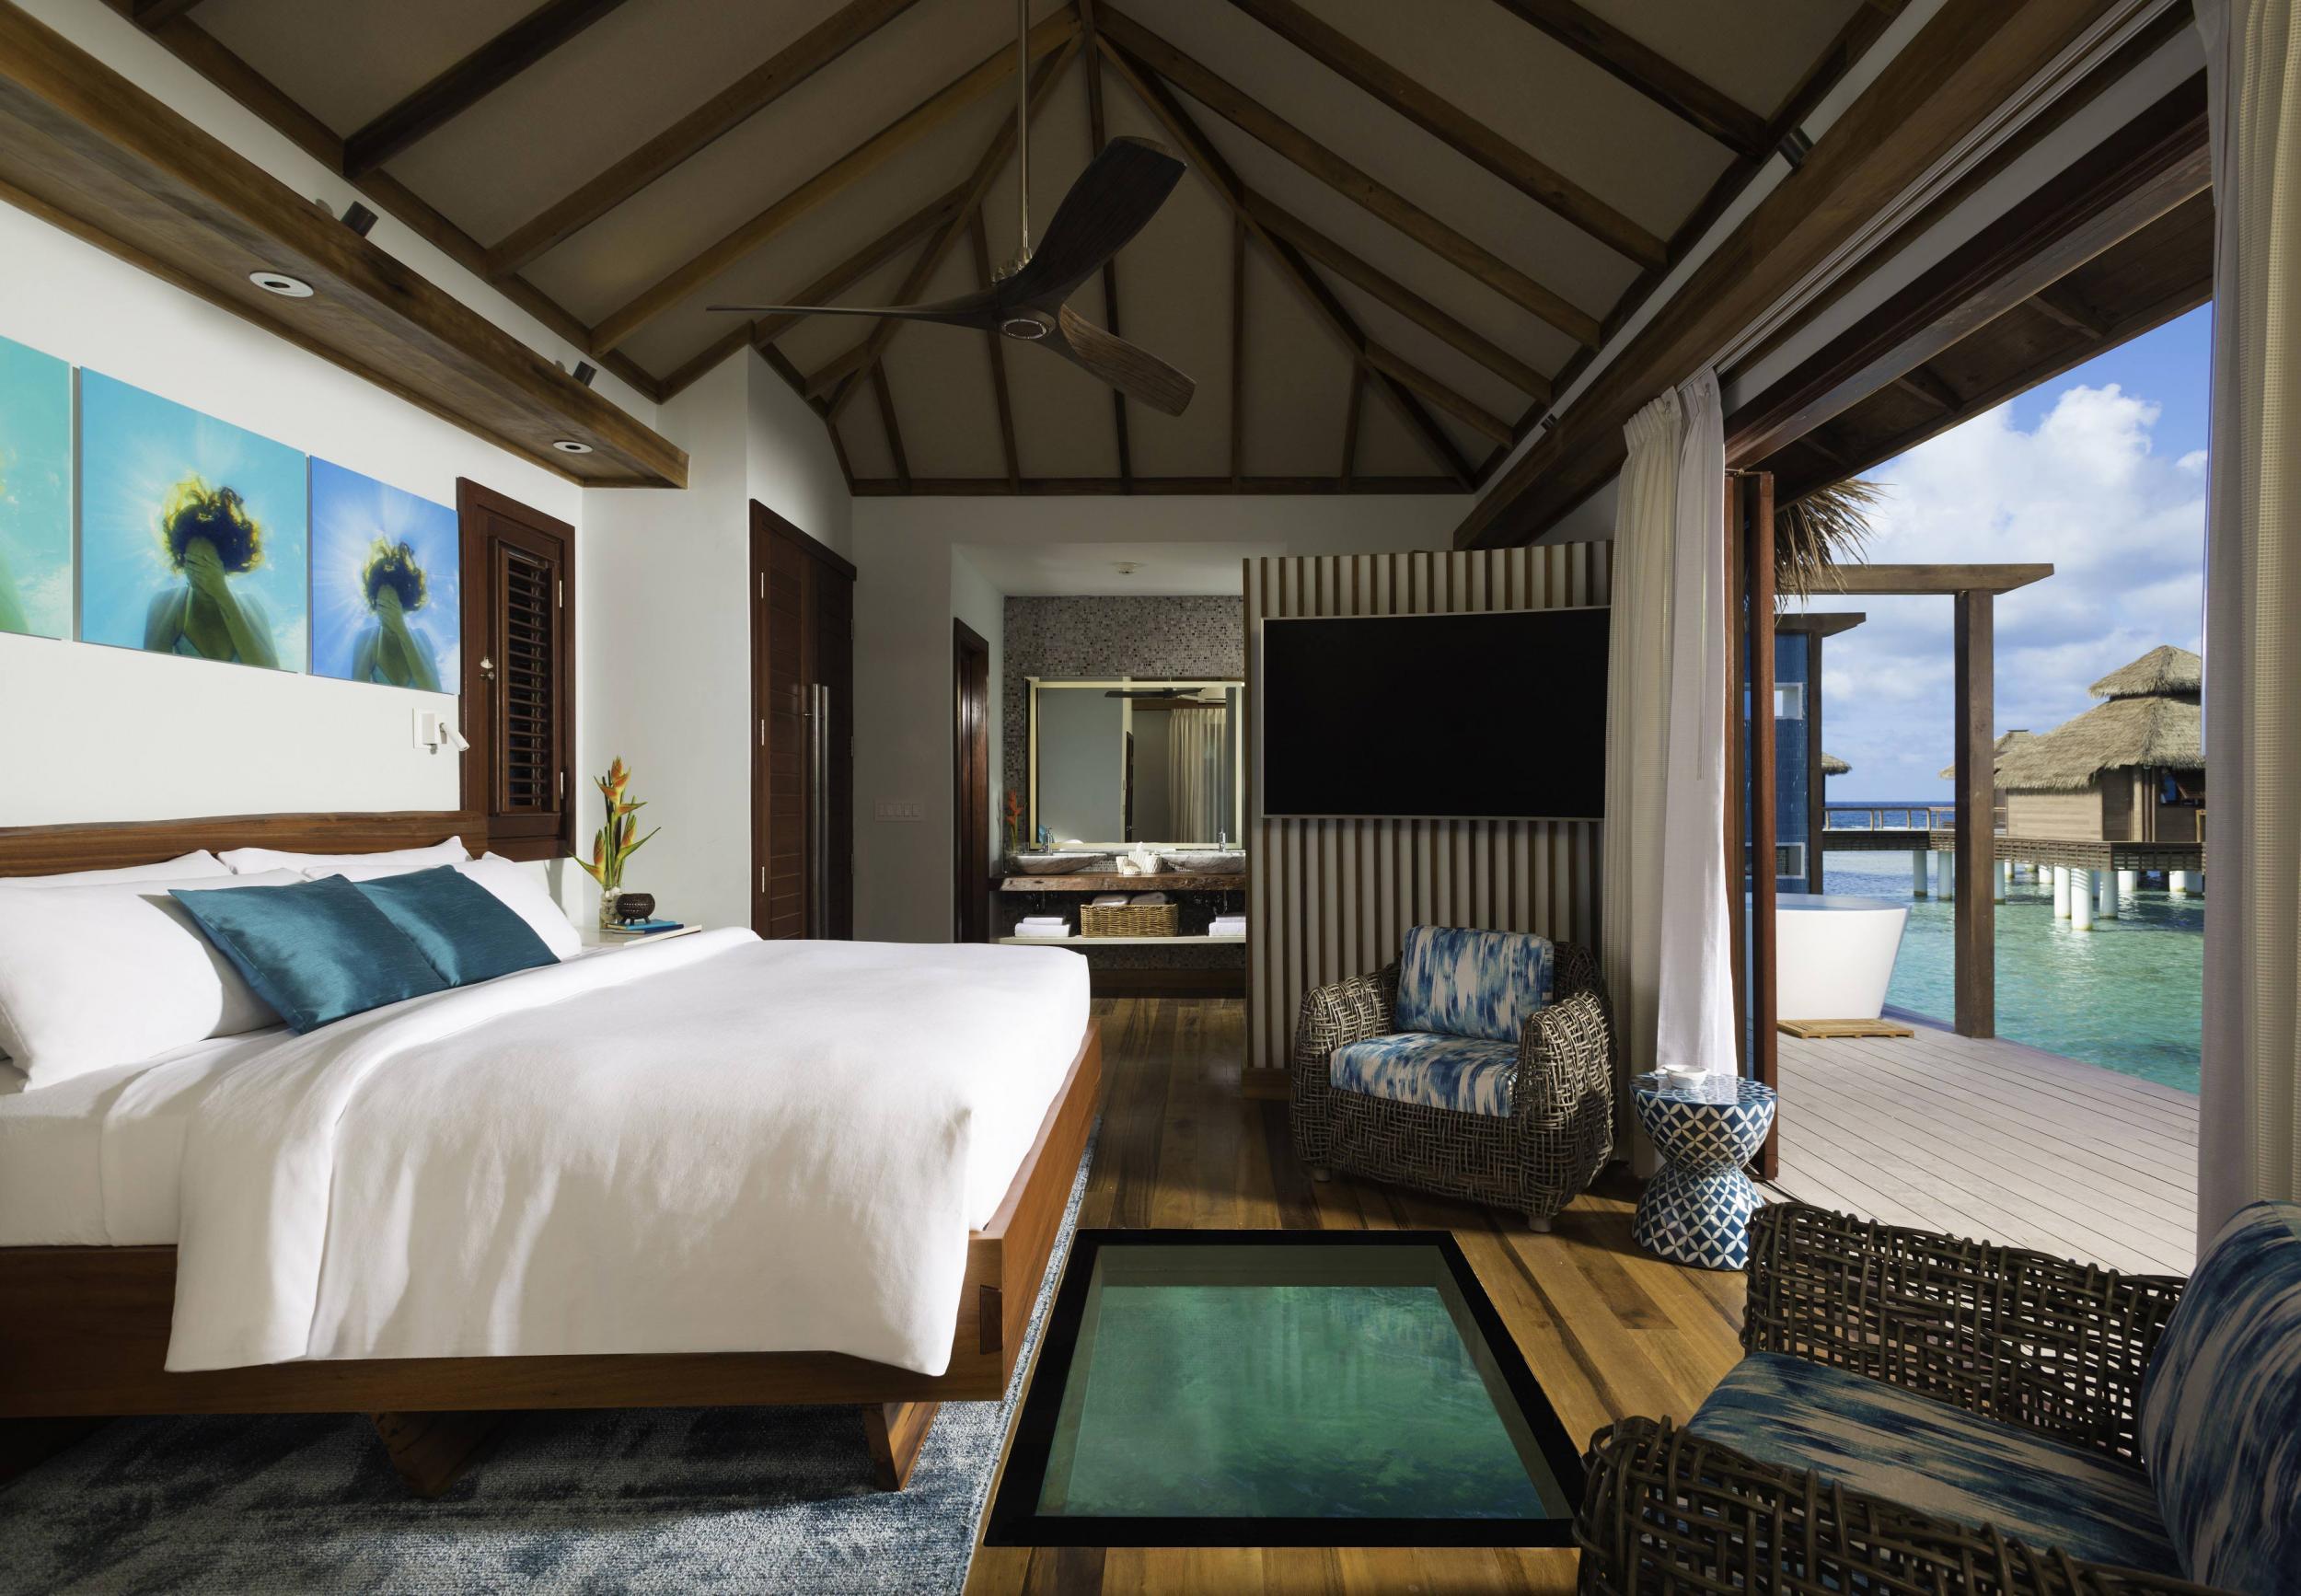 Design Destination: walk over water at Sandals bungalows | The Independent